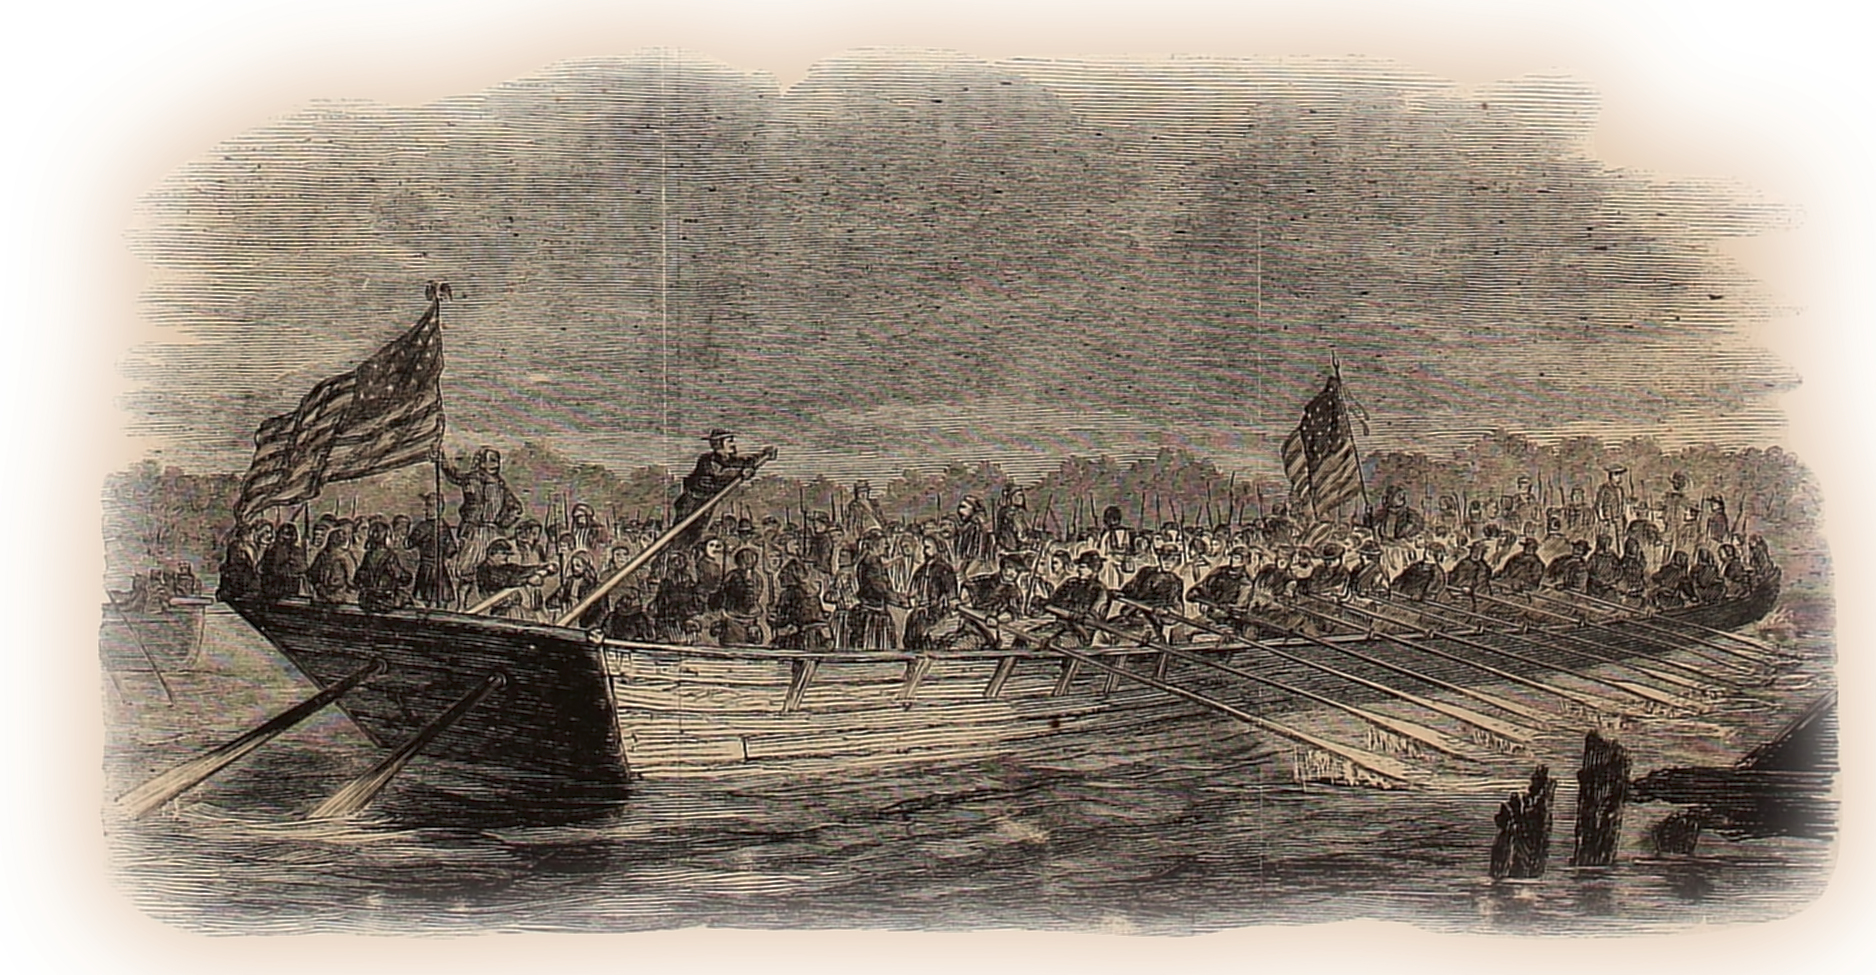 The Naval Brigade, Under Command of Lieutenant Crosby, conveying the Federal Troops over Hampton Creek on the Night of 8th of June, Previous to the Battle of Great Bethel. From a Sketch by our Special Artist Accompanying Gen. Butler's Command. (Published in Frank Leslie's Illustrated Newspaper, June 29, 1861.)